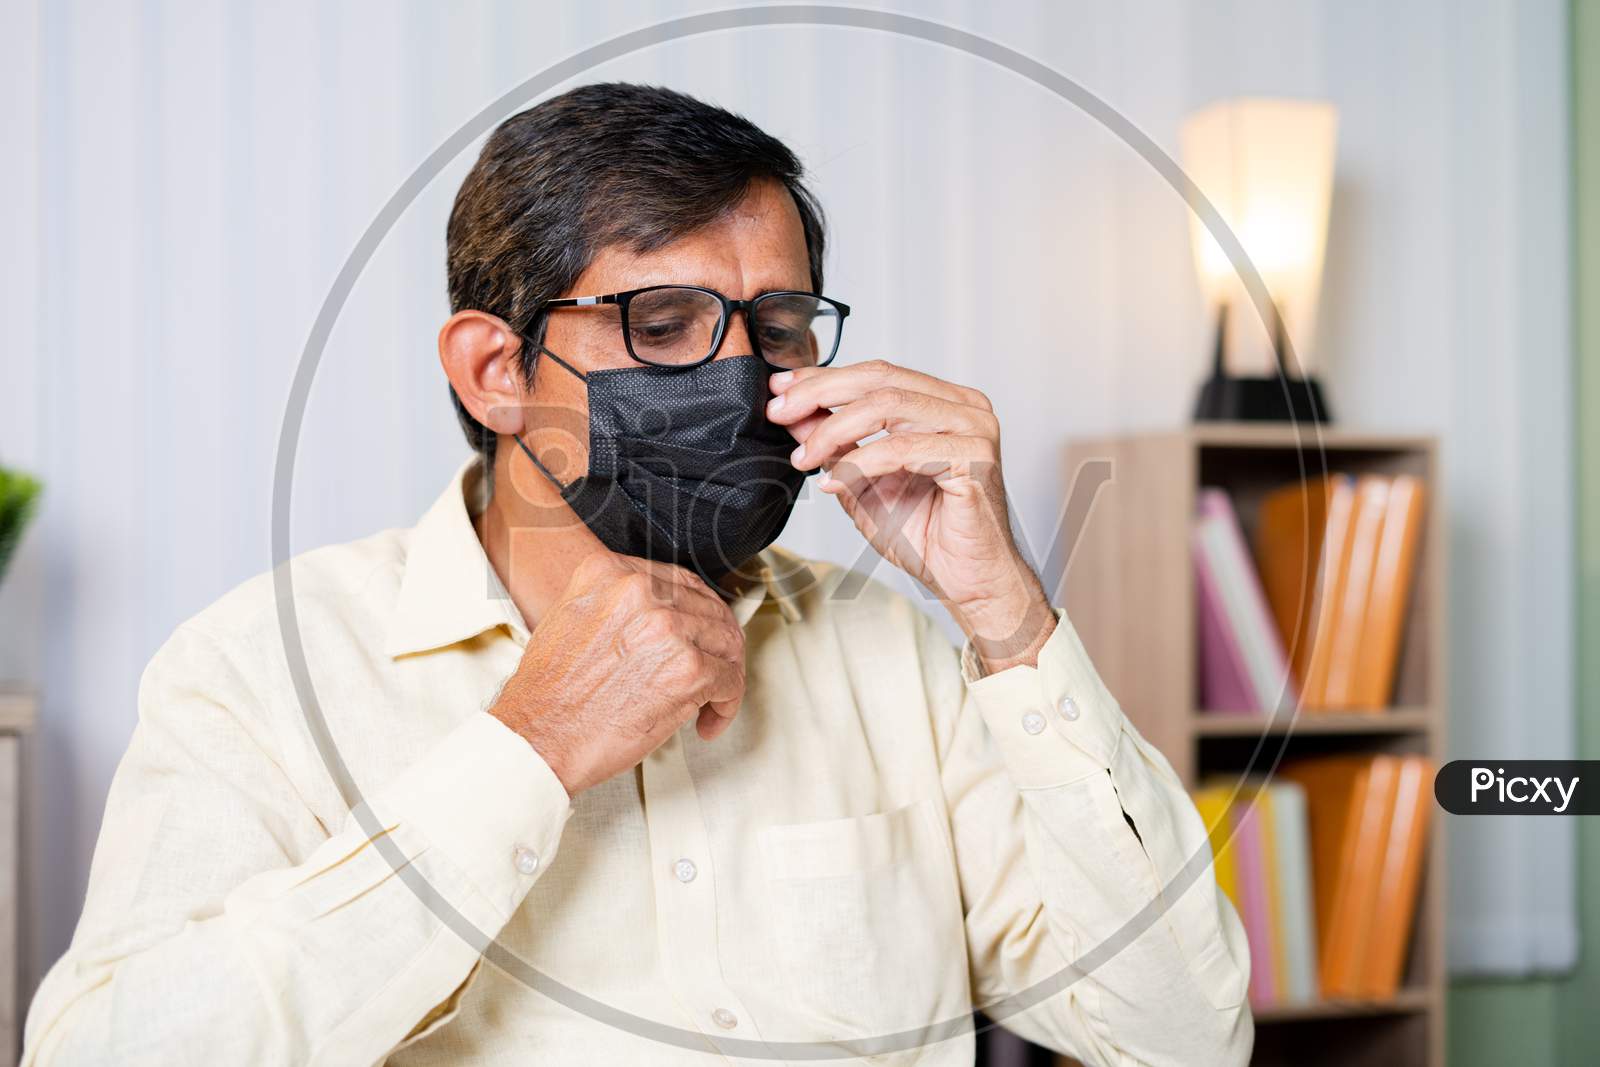 Businessman Wearing Mask While At Office Before Starting Work Due To Coronavirus Covid Pandemic - Concept Of New Normal,Work From Home, Healthcare And Medical.